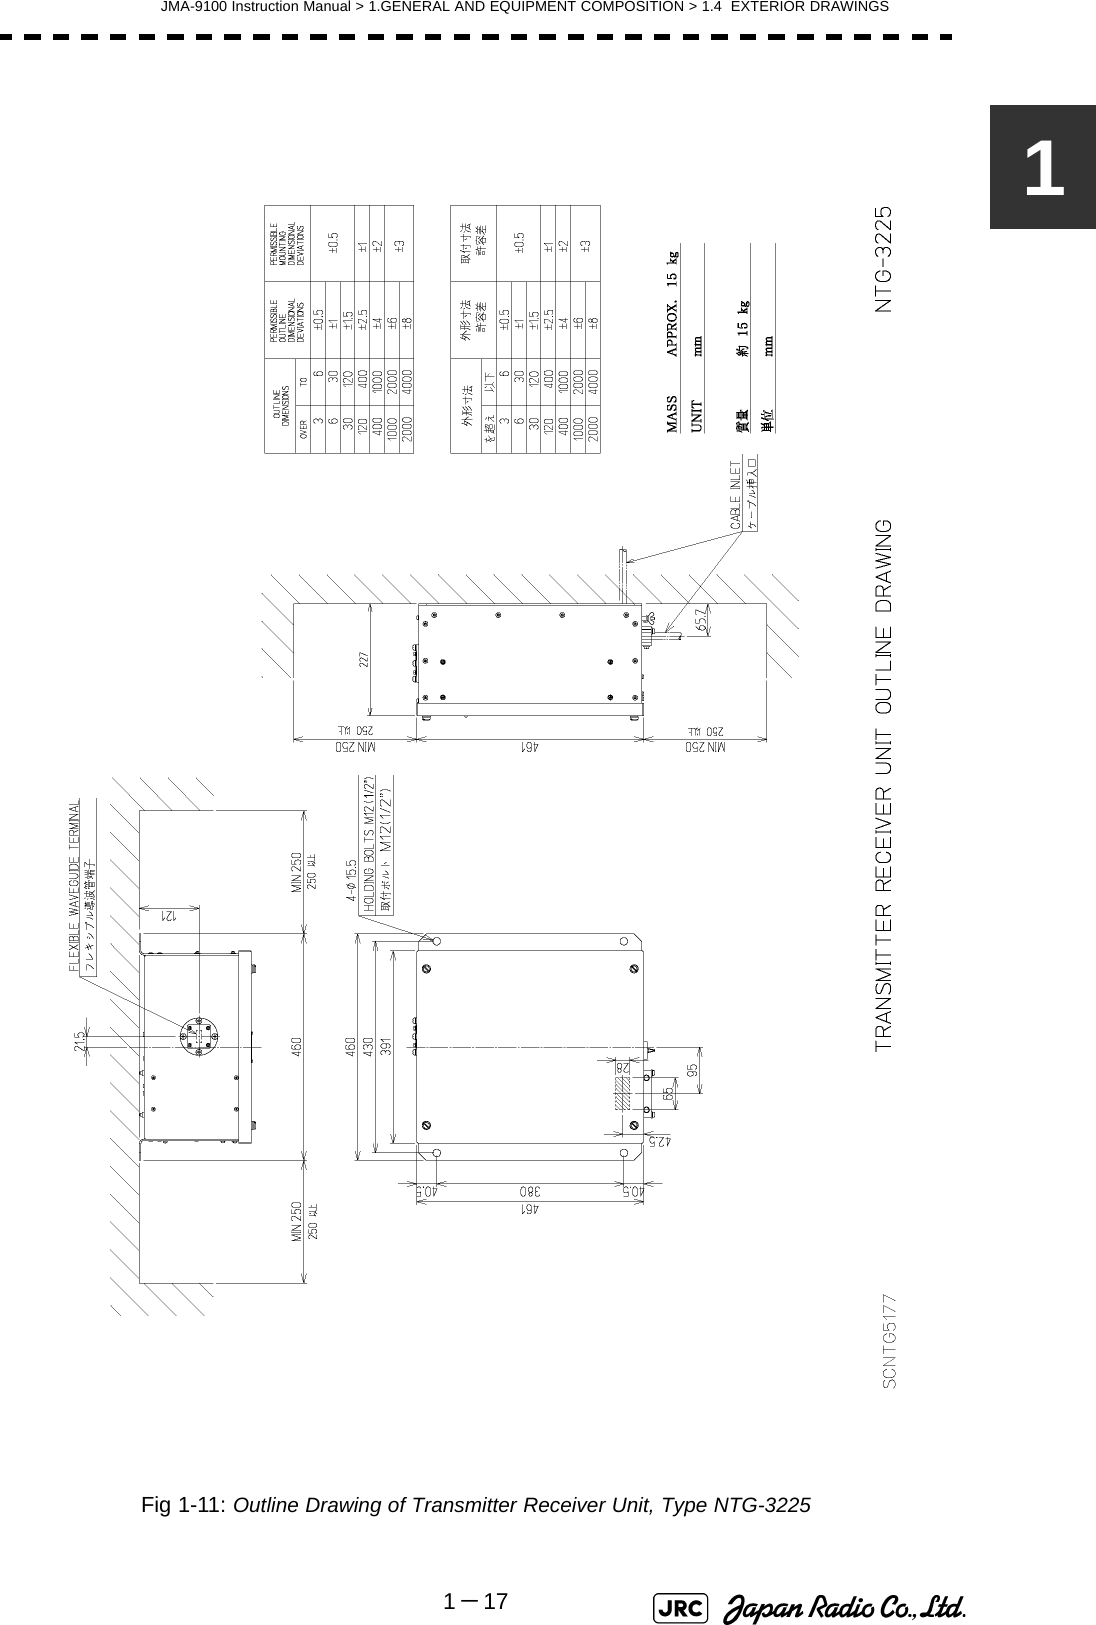 JMA-9100 Instruction Manual &gt; 1.GENERAL AND EQUIPMENT COMPOSITION &gt; 1.4  EXTERIOR DRAWINGS1－171Fig 1-11: Outline Drawing of Transmitter Receiver Unit, Type NTG-3225